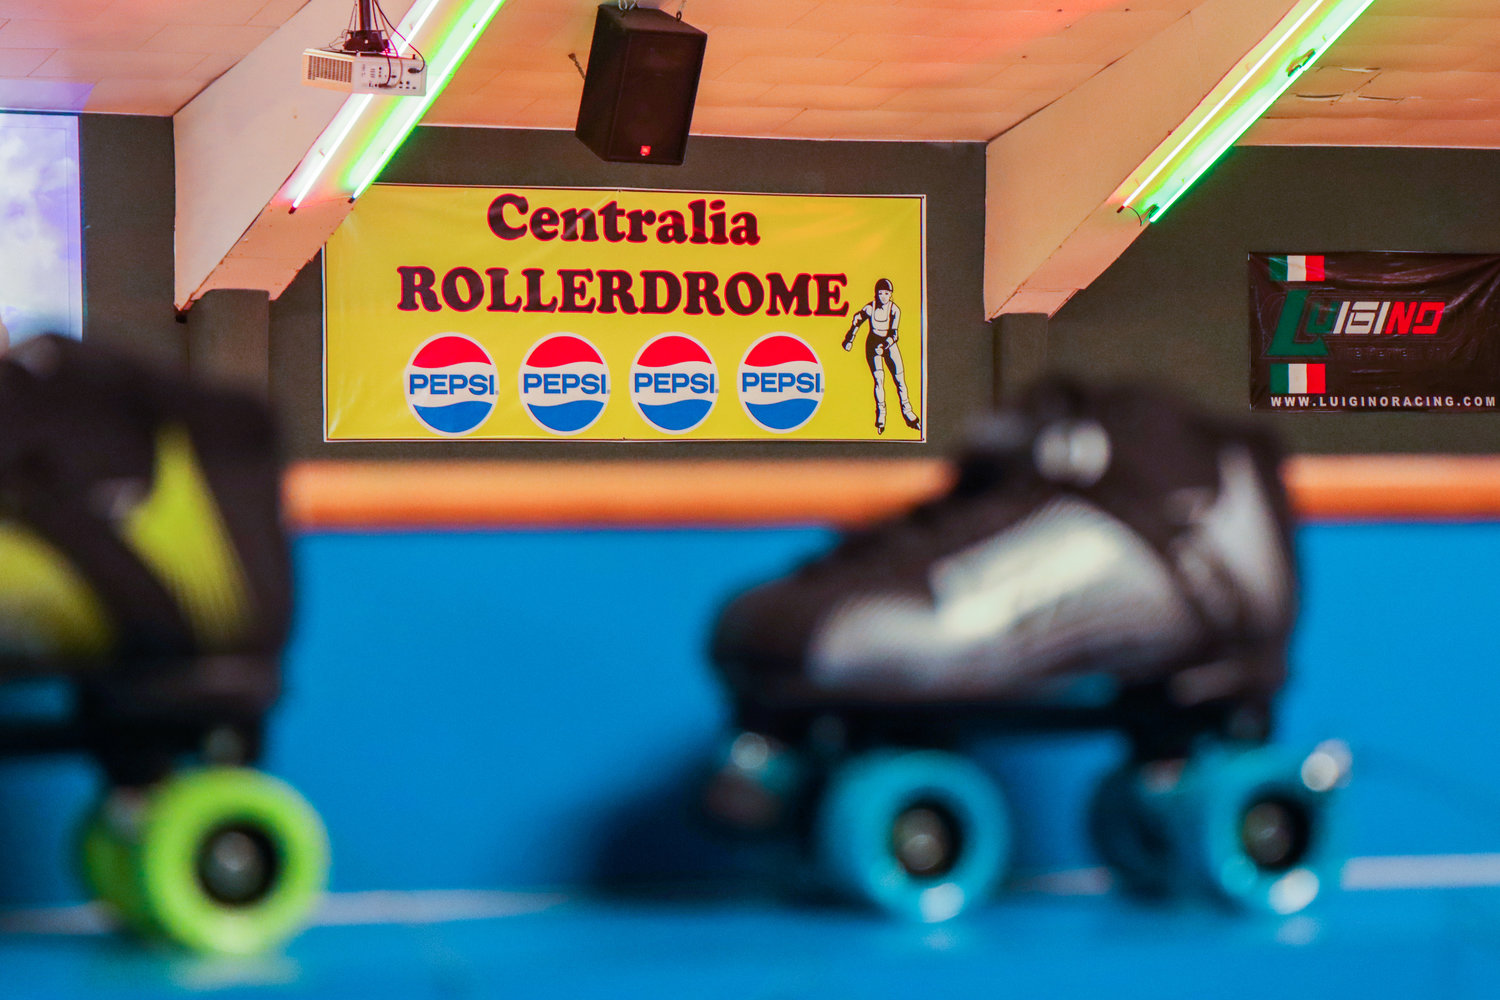 Skates sit on display inside the Centralia Rollerdrome Monday afternoon.